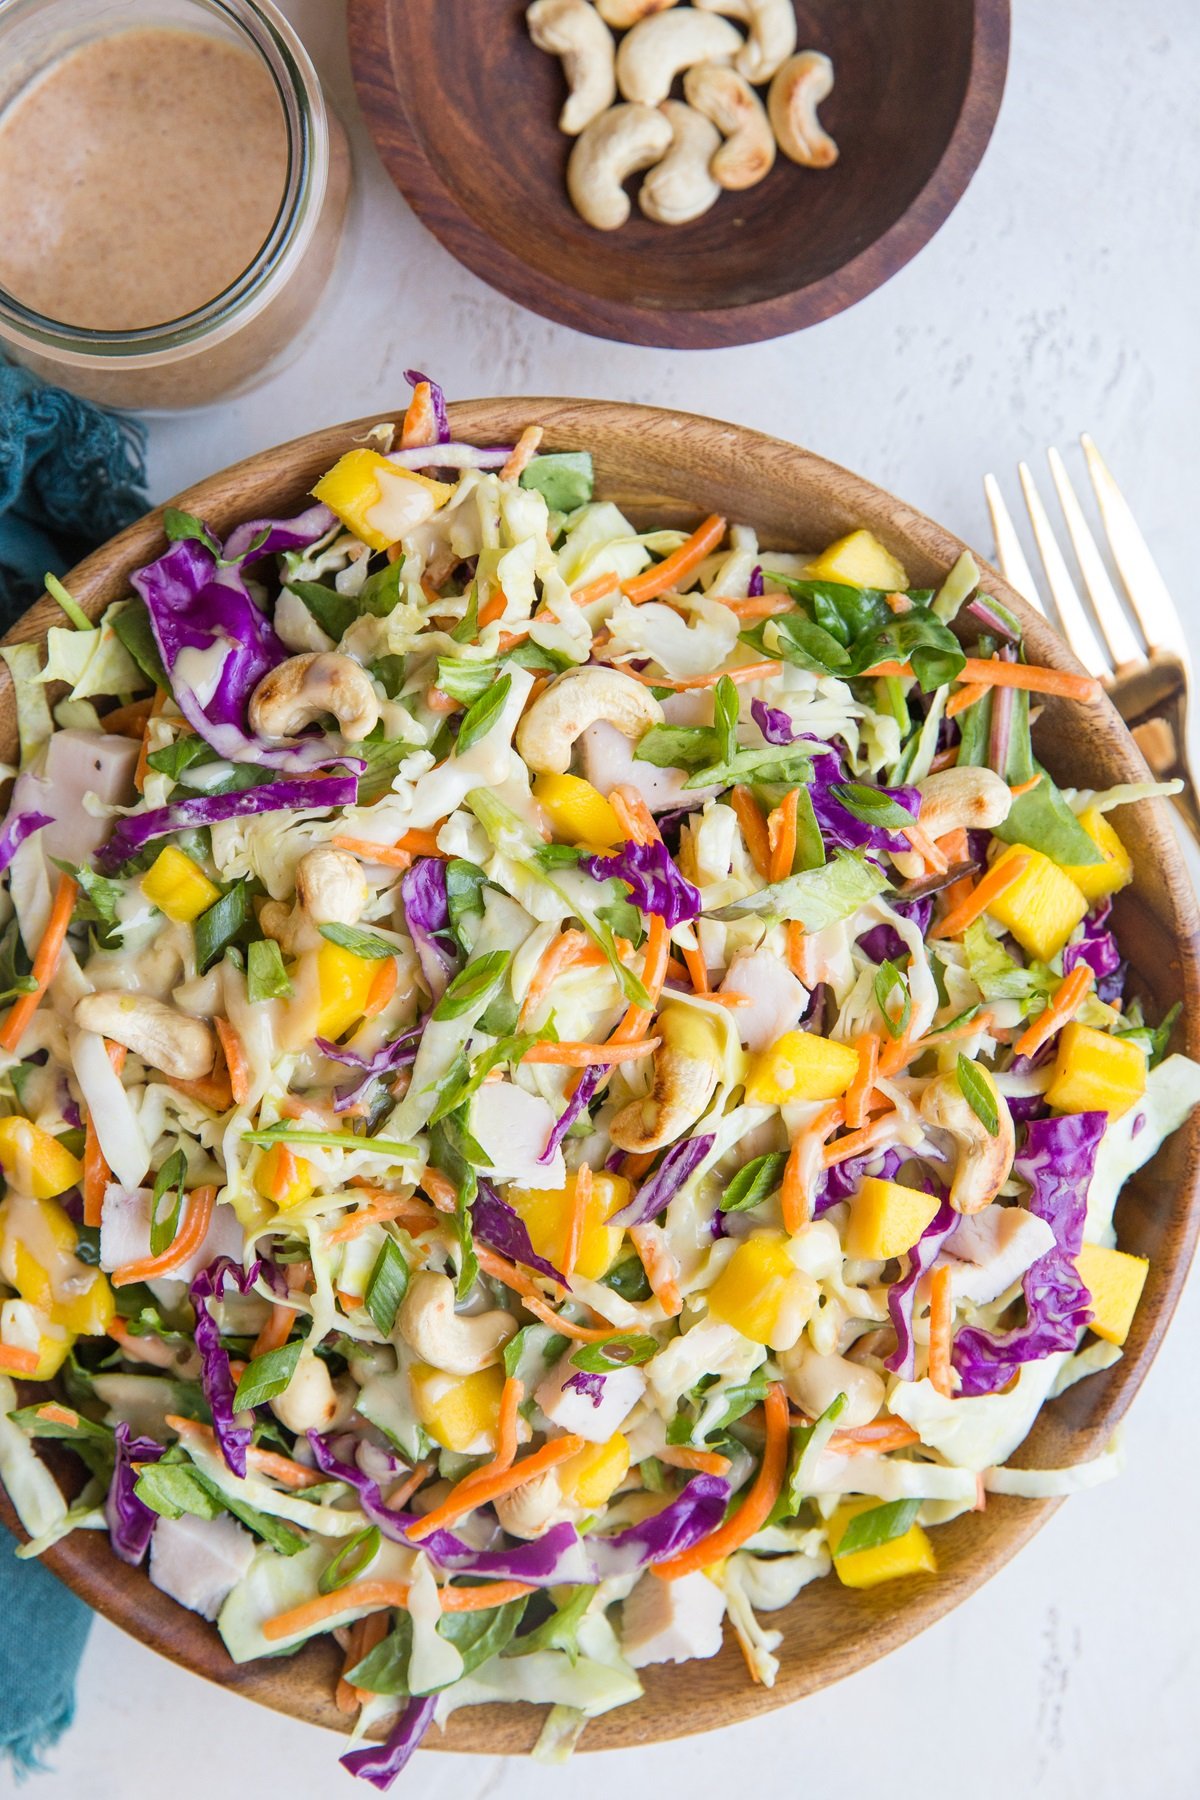 Thai Chicken Chopped Salad with peanut dressing and toasted cashews. Vibrant, delicious salad that is light yet satisfying.